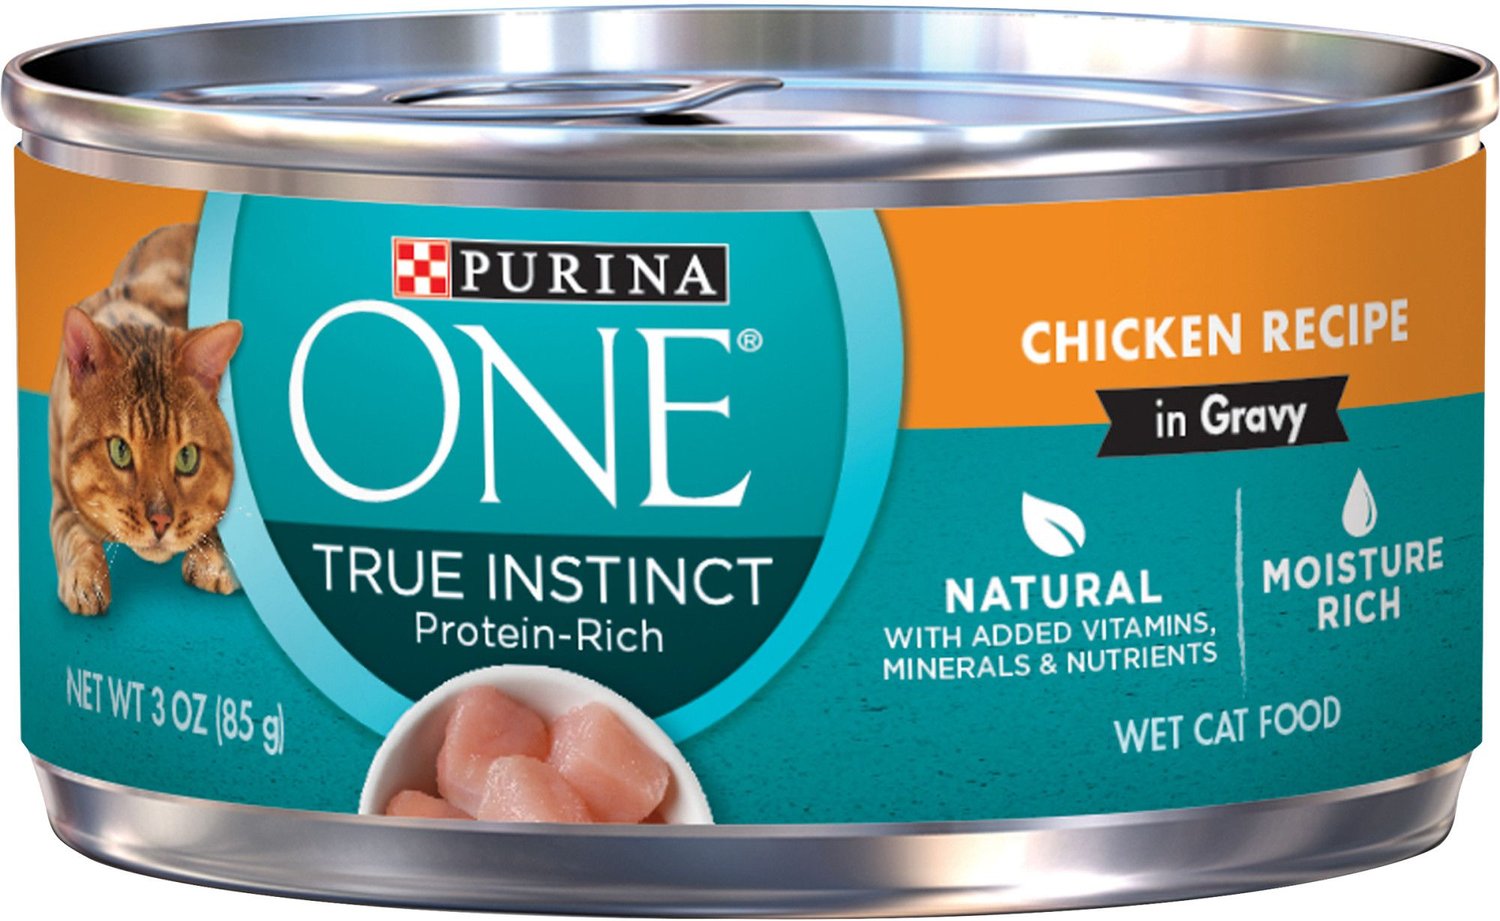 Purina One Canned Cat Food Calories